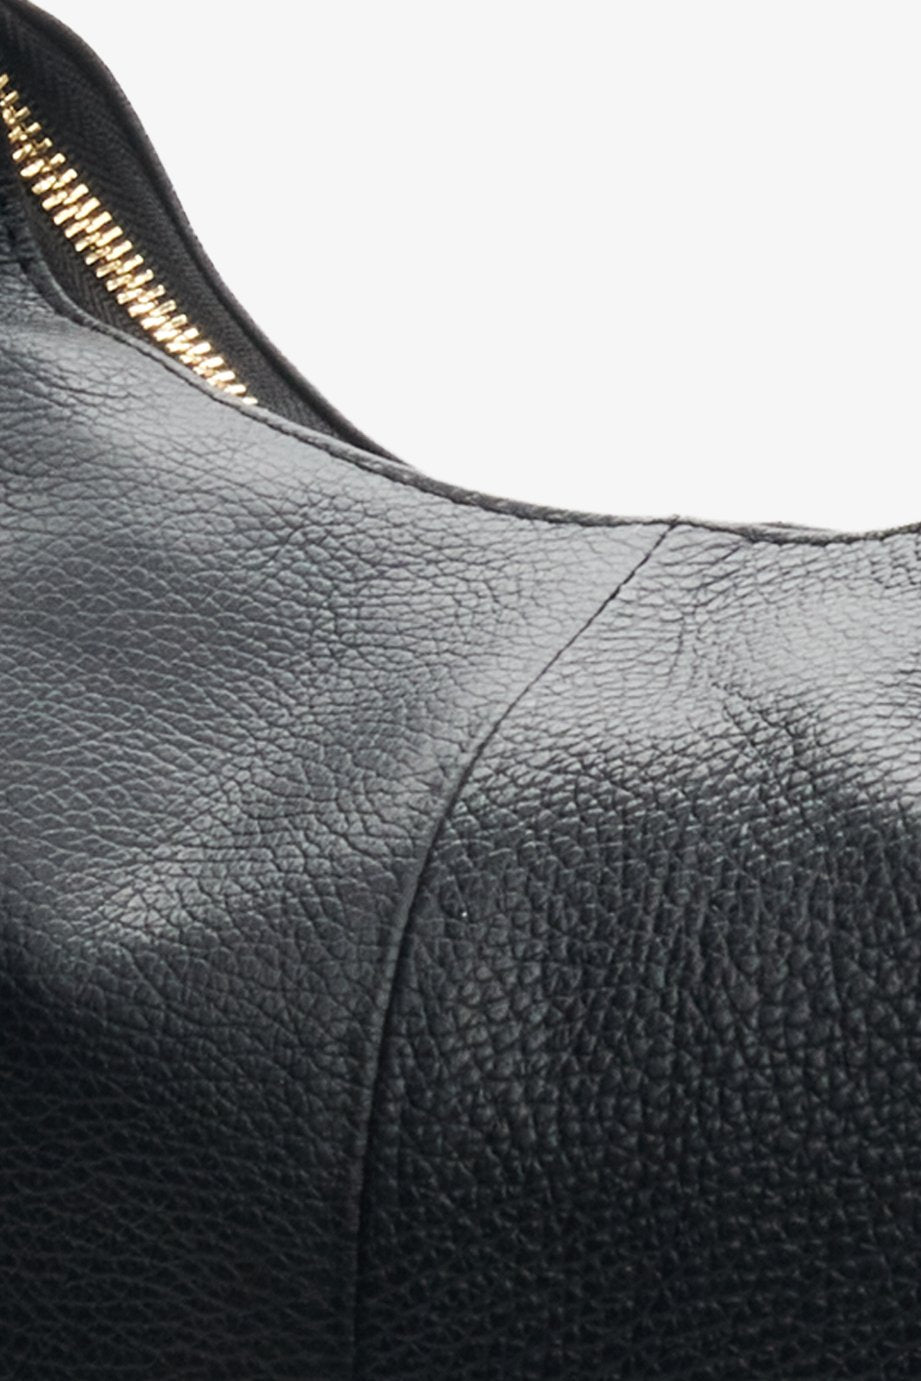 Women's black shopper made of genuine leather by Estro - close-up on details.